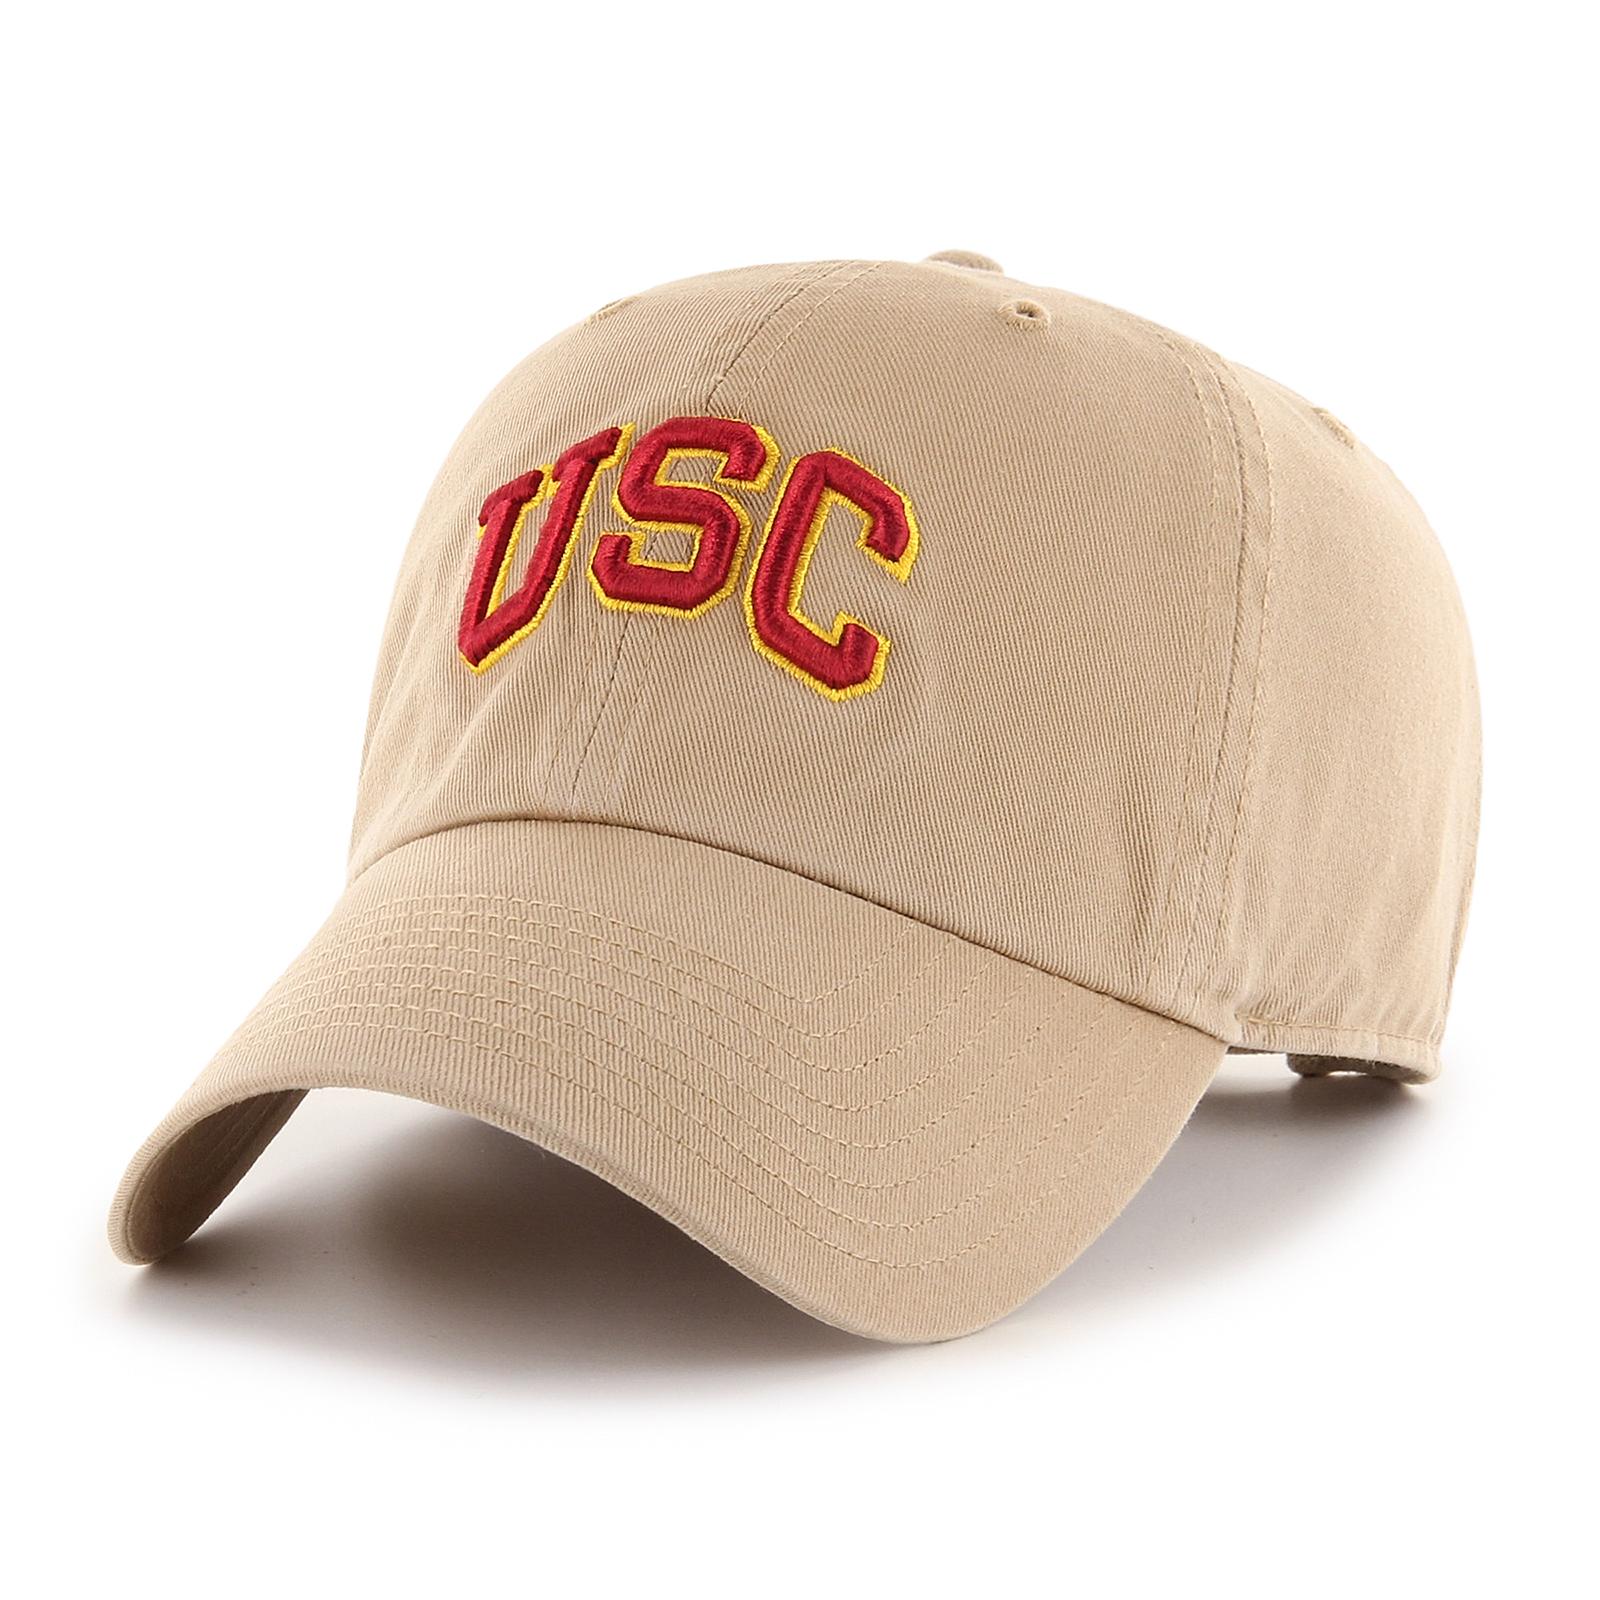 USC Arch Mens Clean Up Hat image01